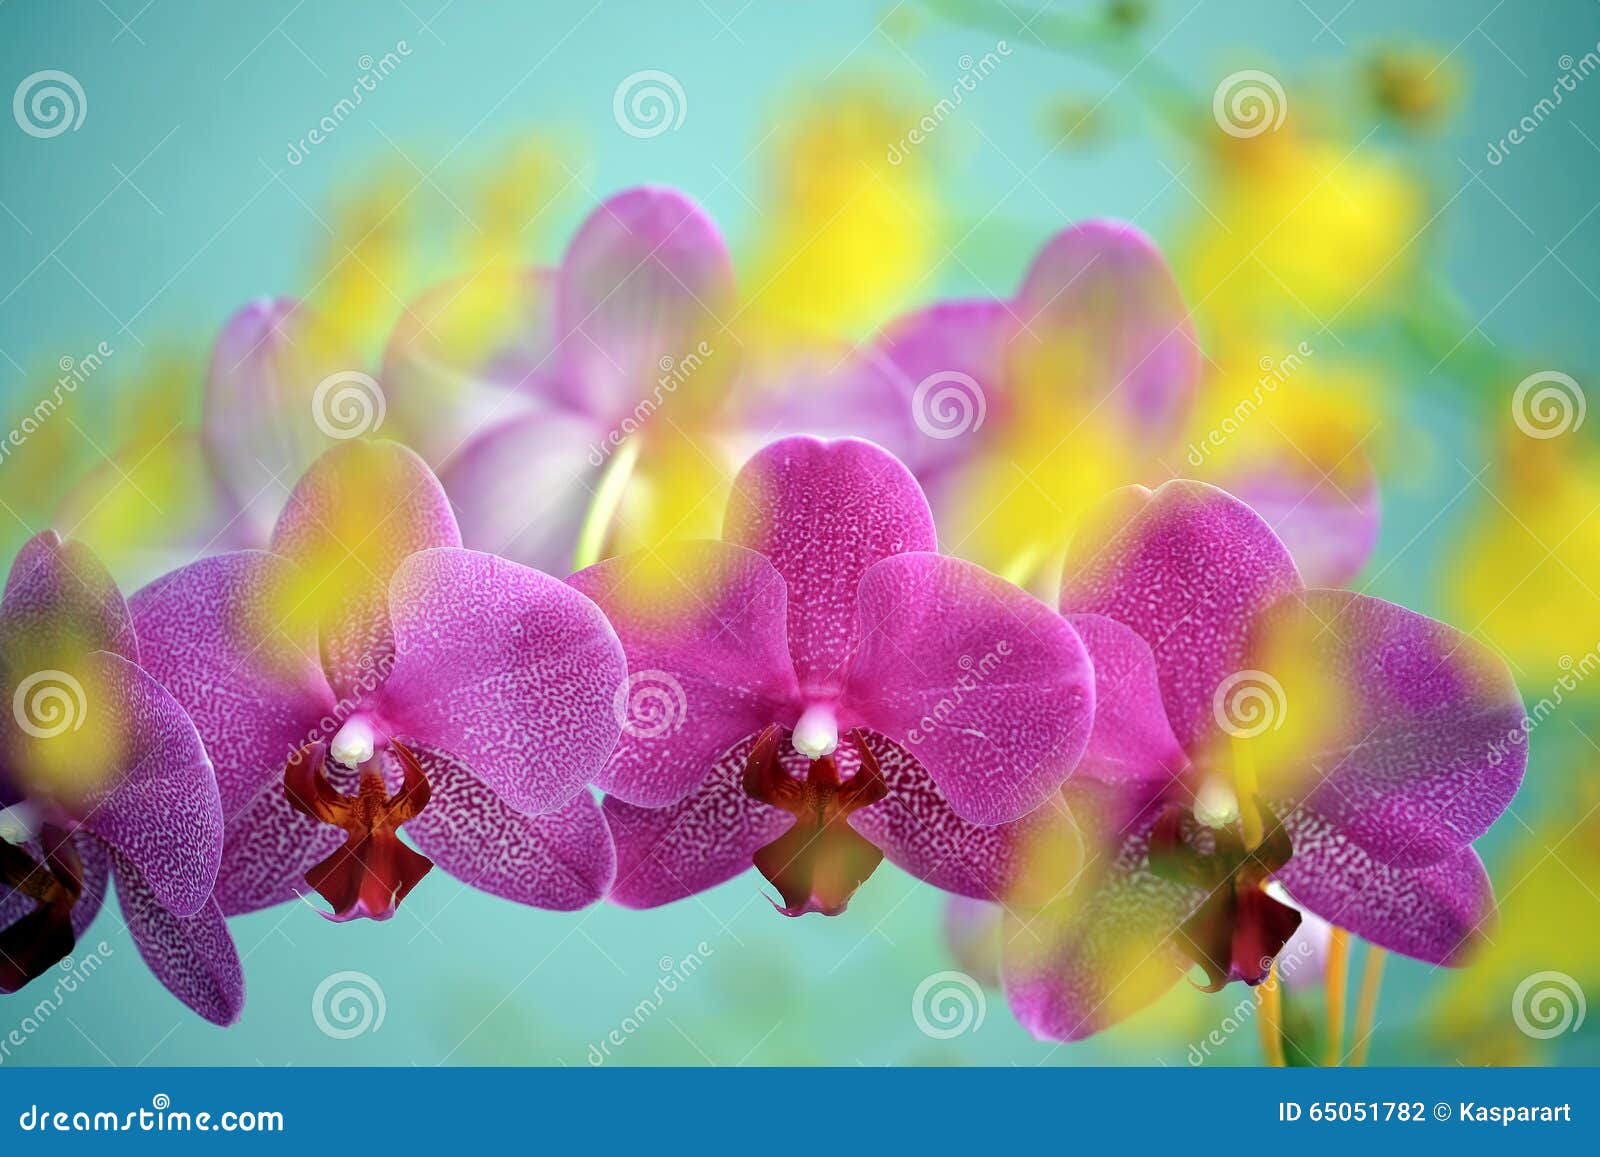 row of pink orchid blooms overlayed with unsharp yellow orchid blooms